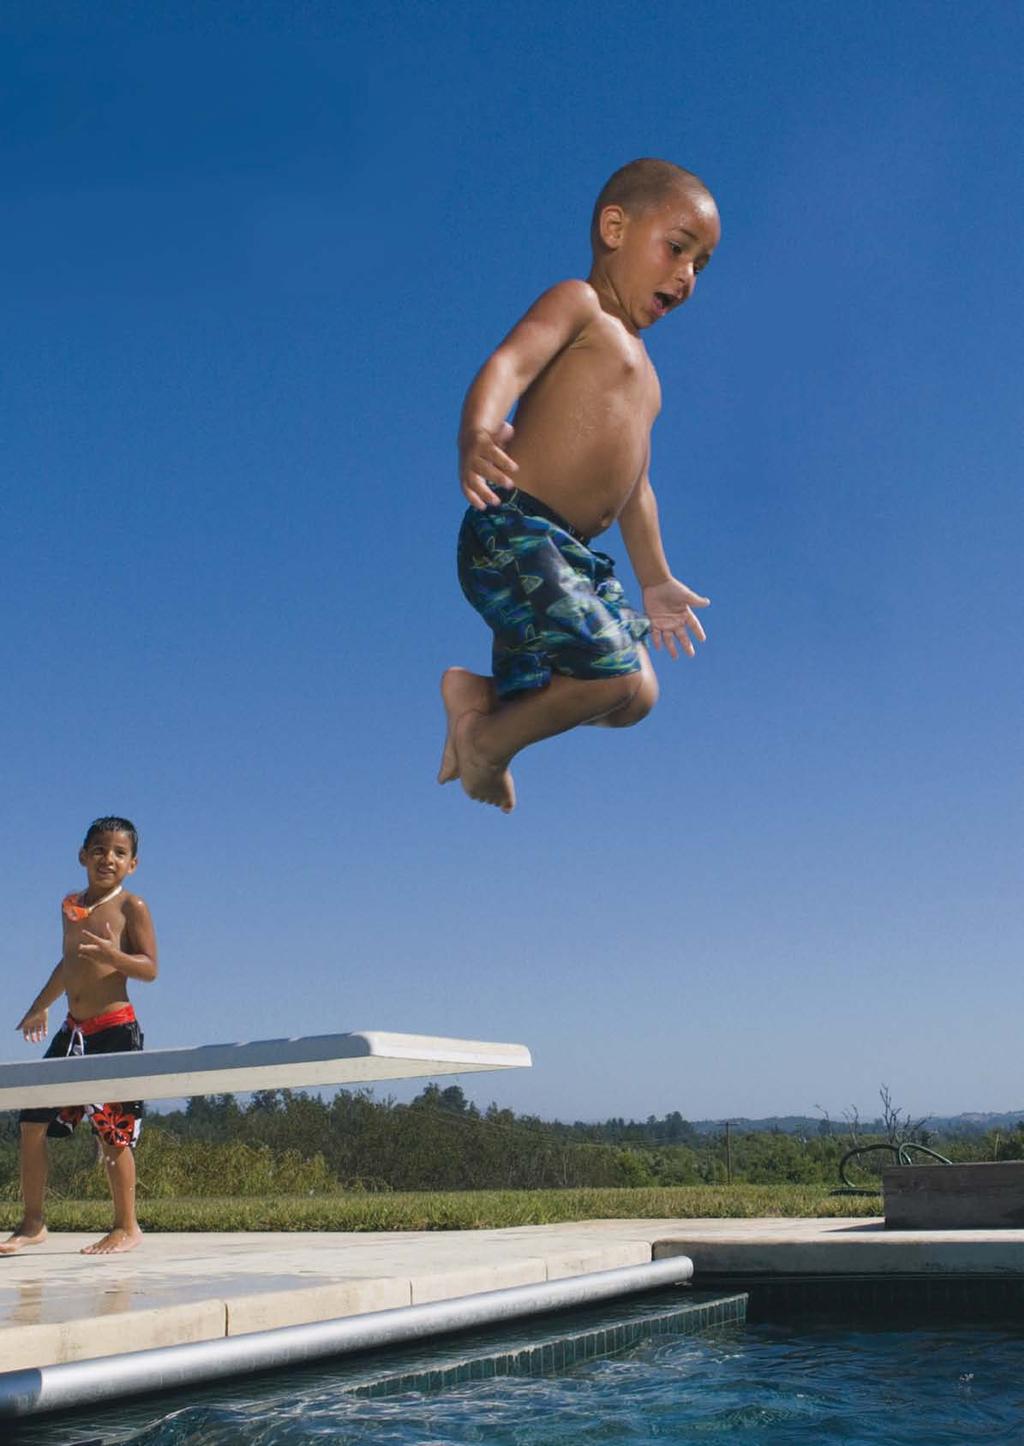 Diving Boards diving boards are designed to deliver serious fun, and at the same time stand up